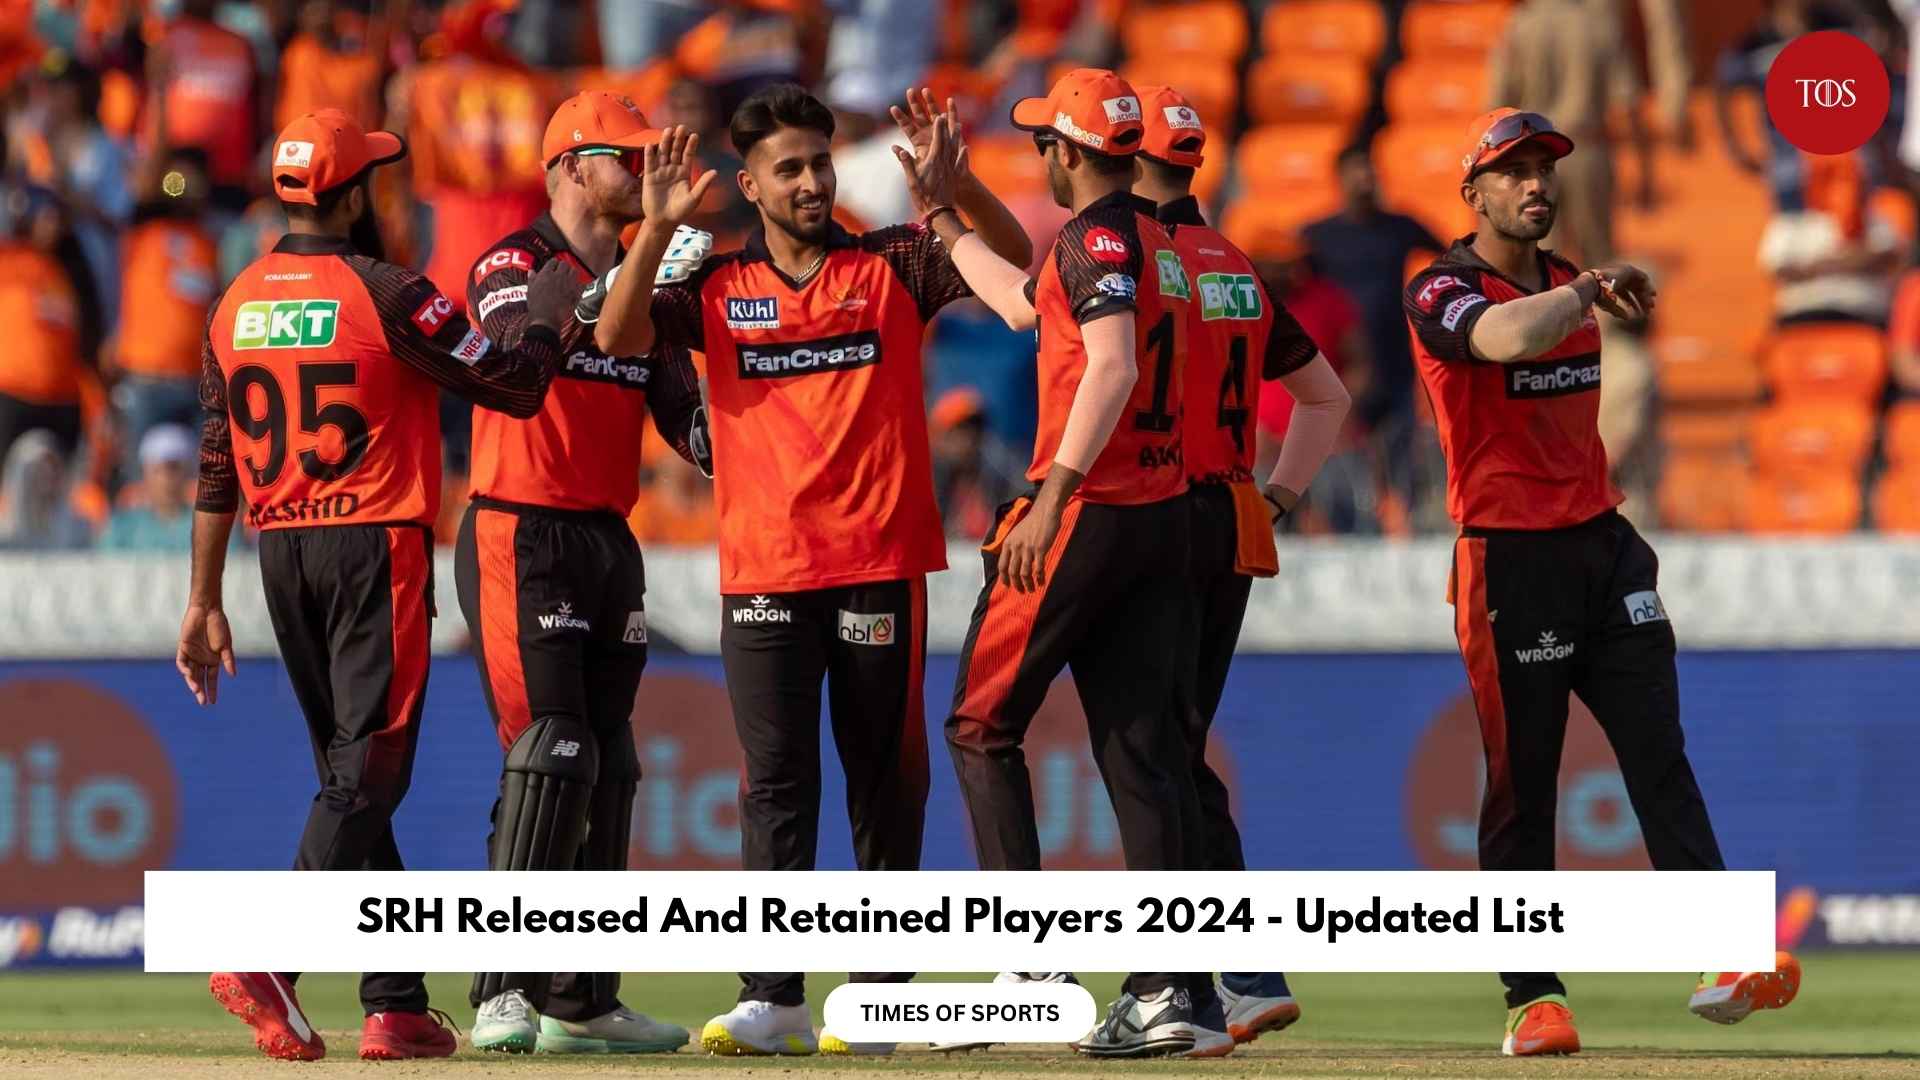 SRH Released And Retained Players 2024 Updated List